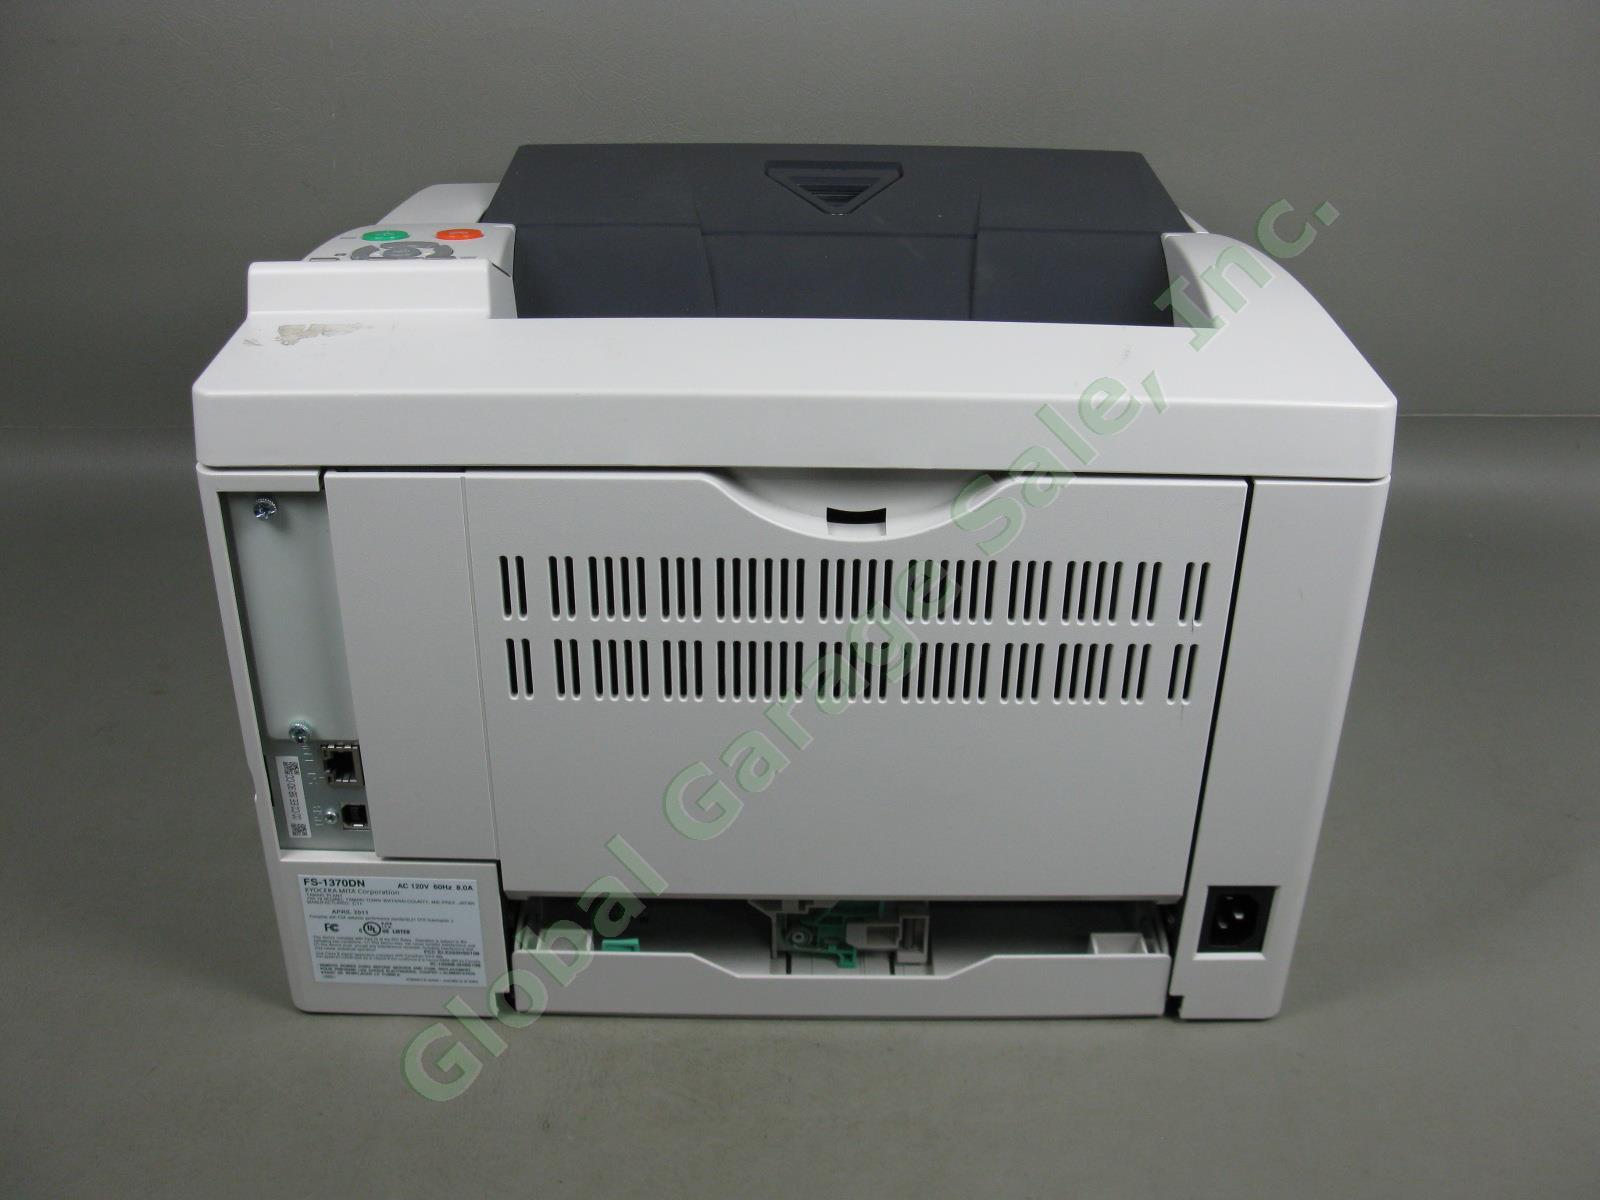 Kyocera Ecosys FS-1370DN Workgroup Network Laser Printer 40% Toner 6851 Pages 4